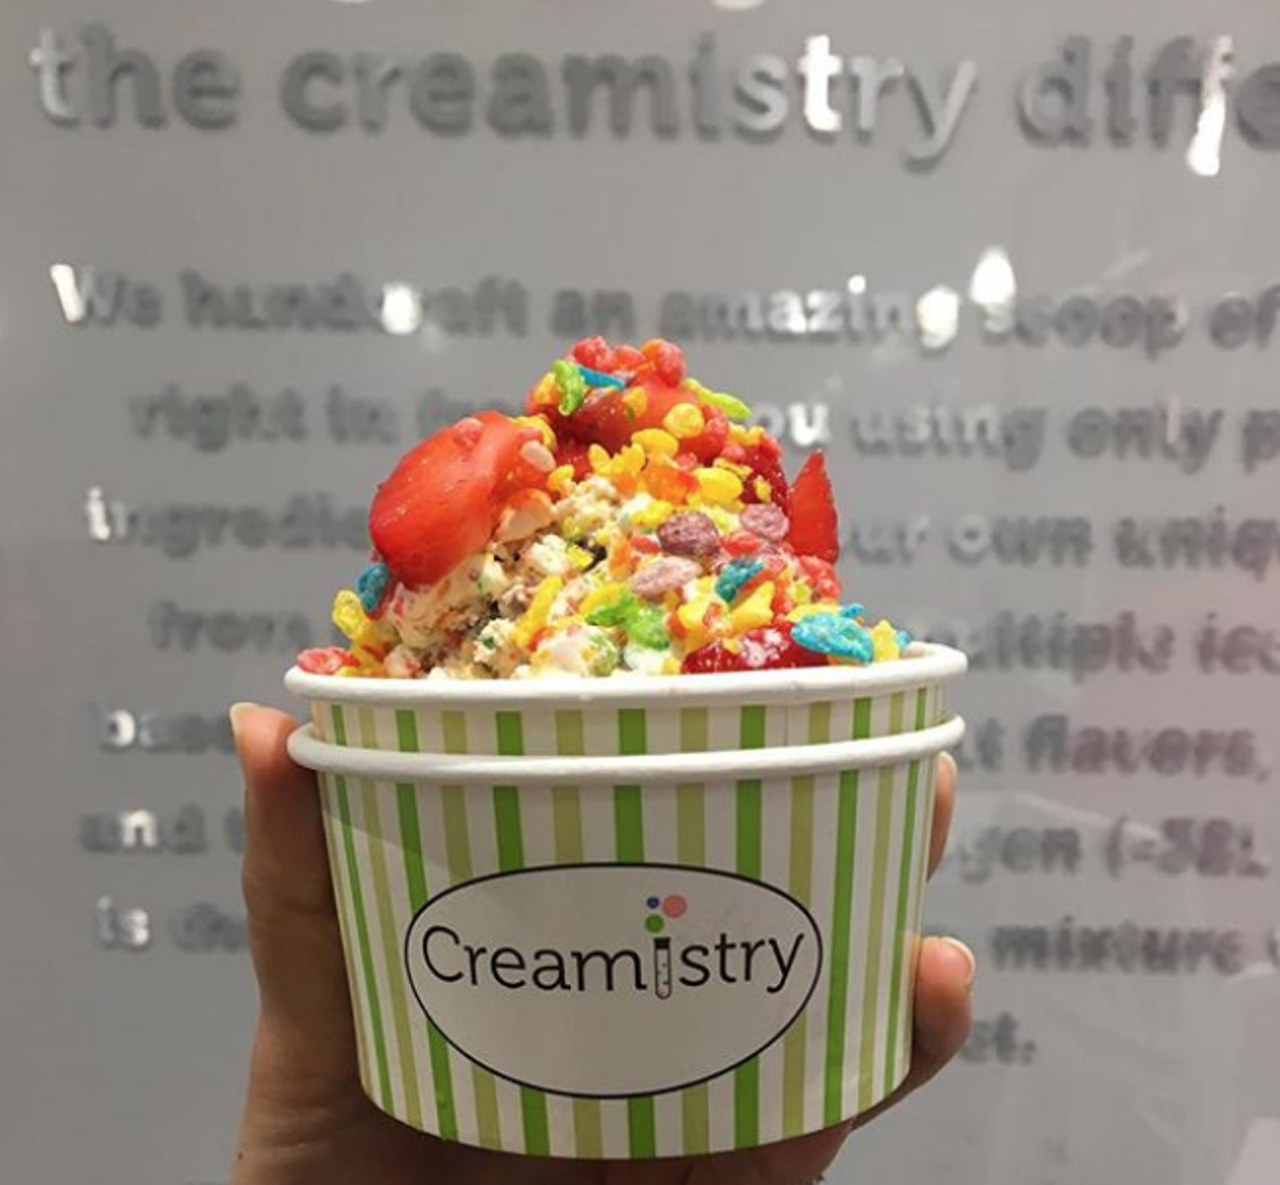 Creamistry
Multiple locations, creamistry.com
This chain has two locations in SA, and good thing they do. The skilled folks here use liquid nitrogen to make premium ice cream one scoop at a time. Trust us, it’s just as fun to watch this magic happen as it is to eat! Make your creation complete with toppings and mix-ins (including natural and organic options) to have it just the way you like it.
Photo via Instagram / beansippin